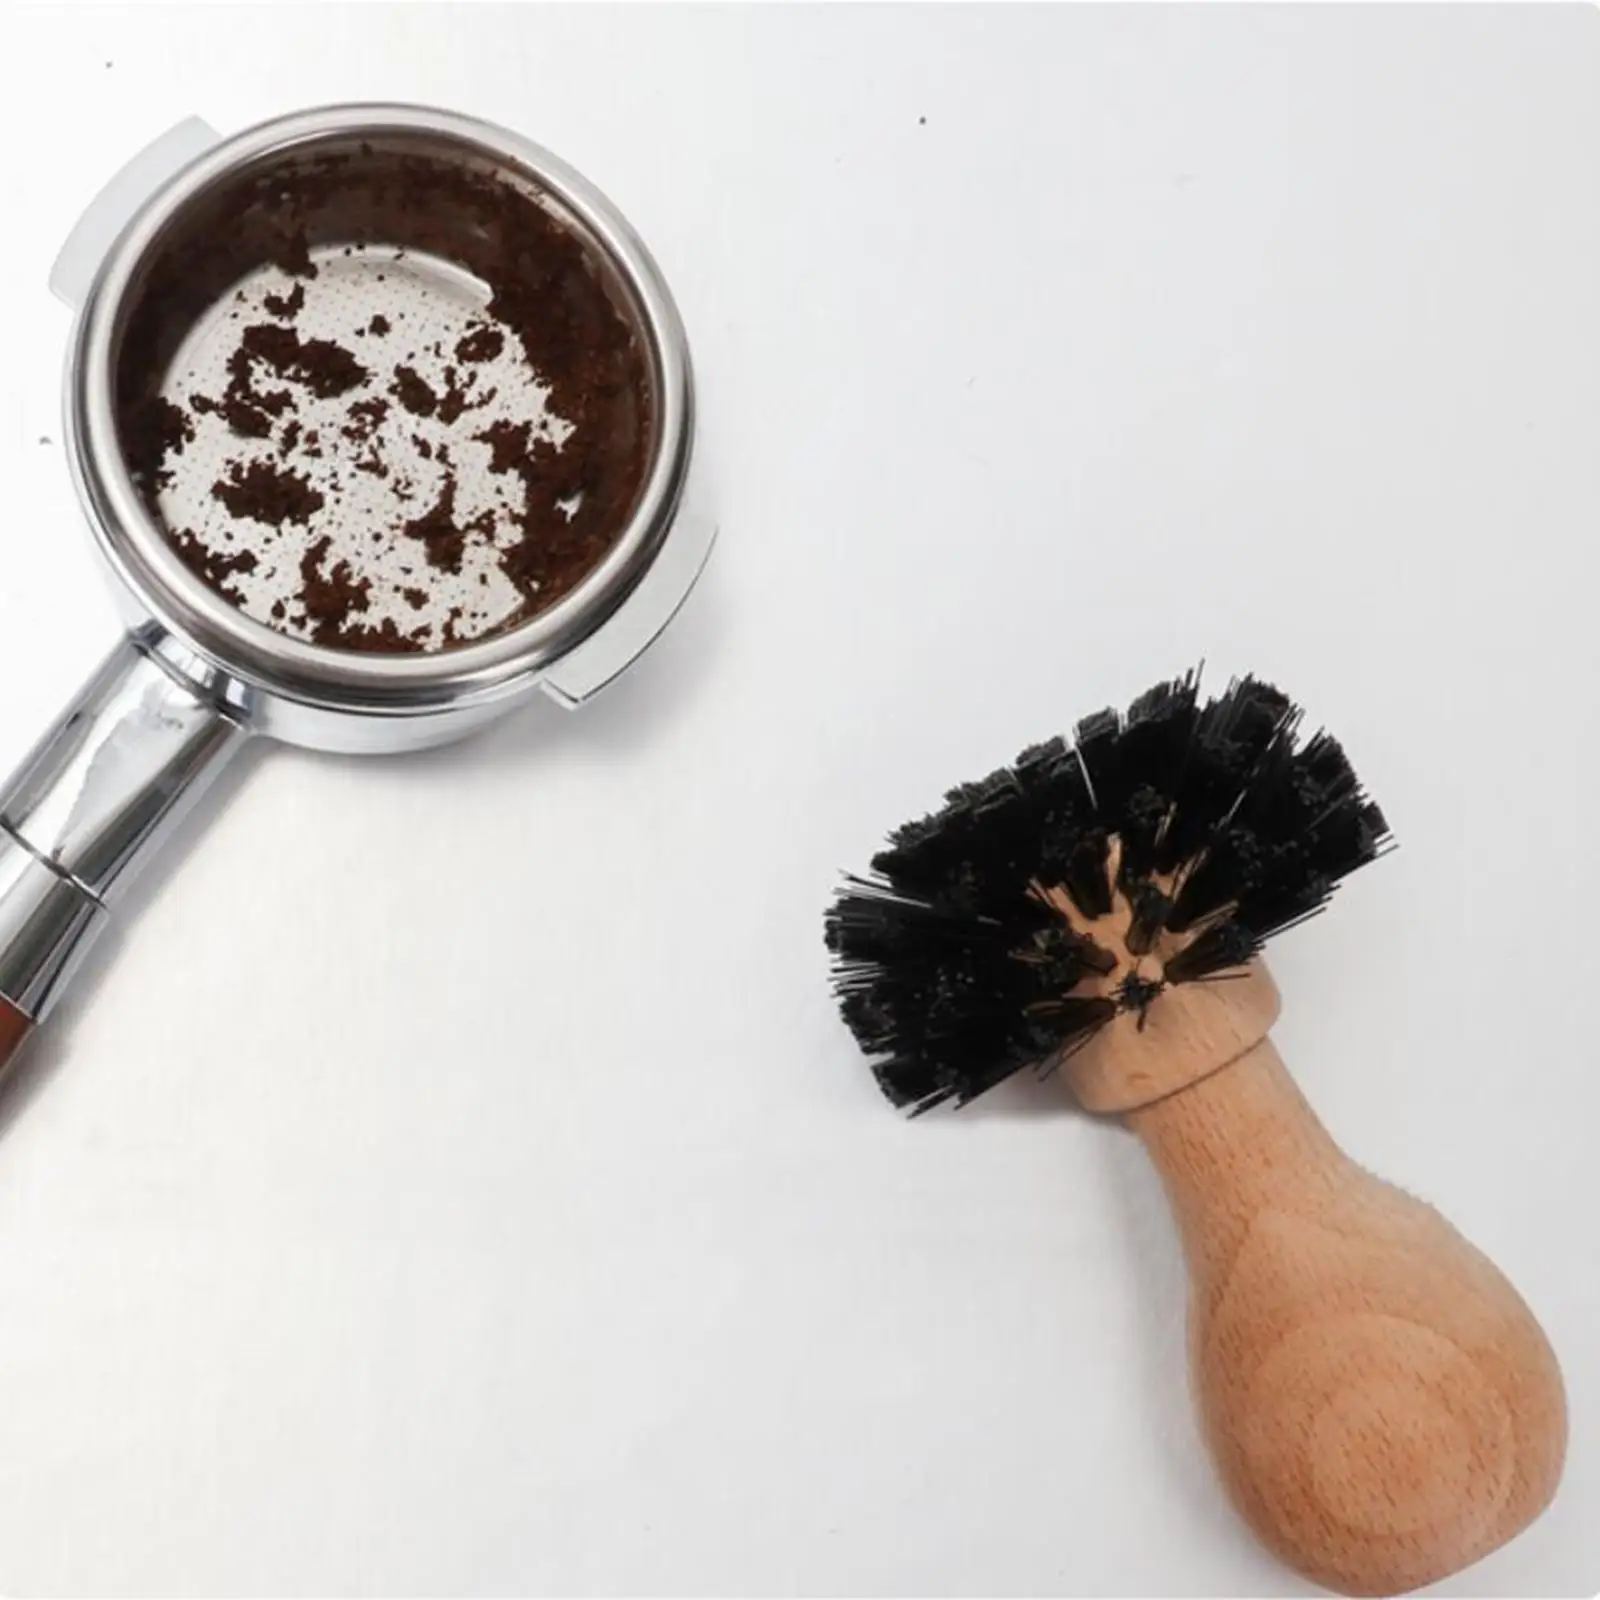 Espresso Tamper Cleaning Brush with Wooden Handle for 51mm 53mm Basket Home